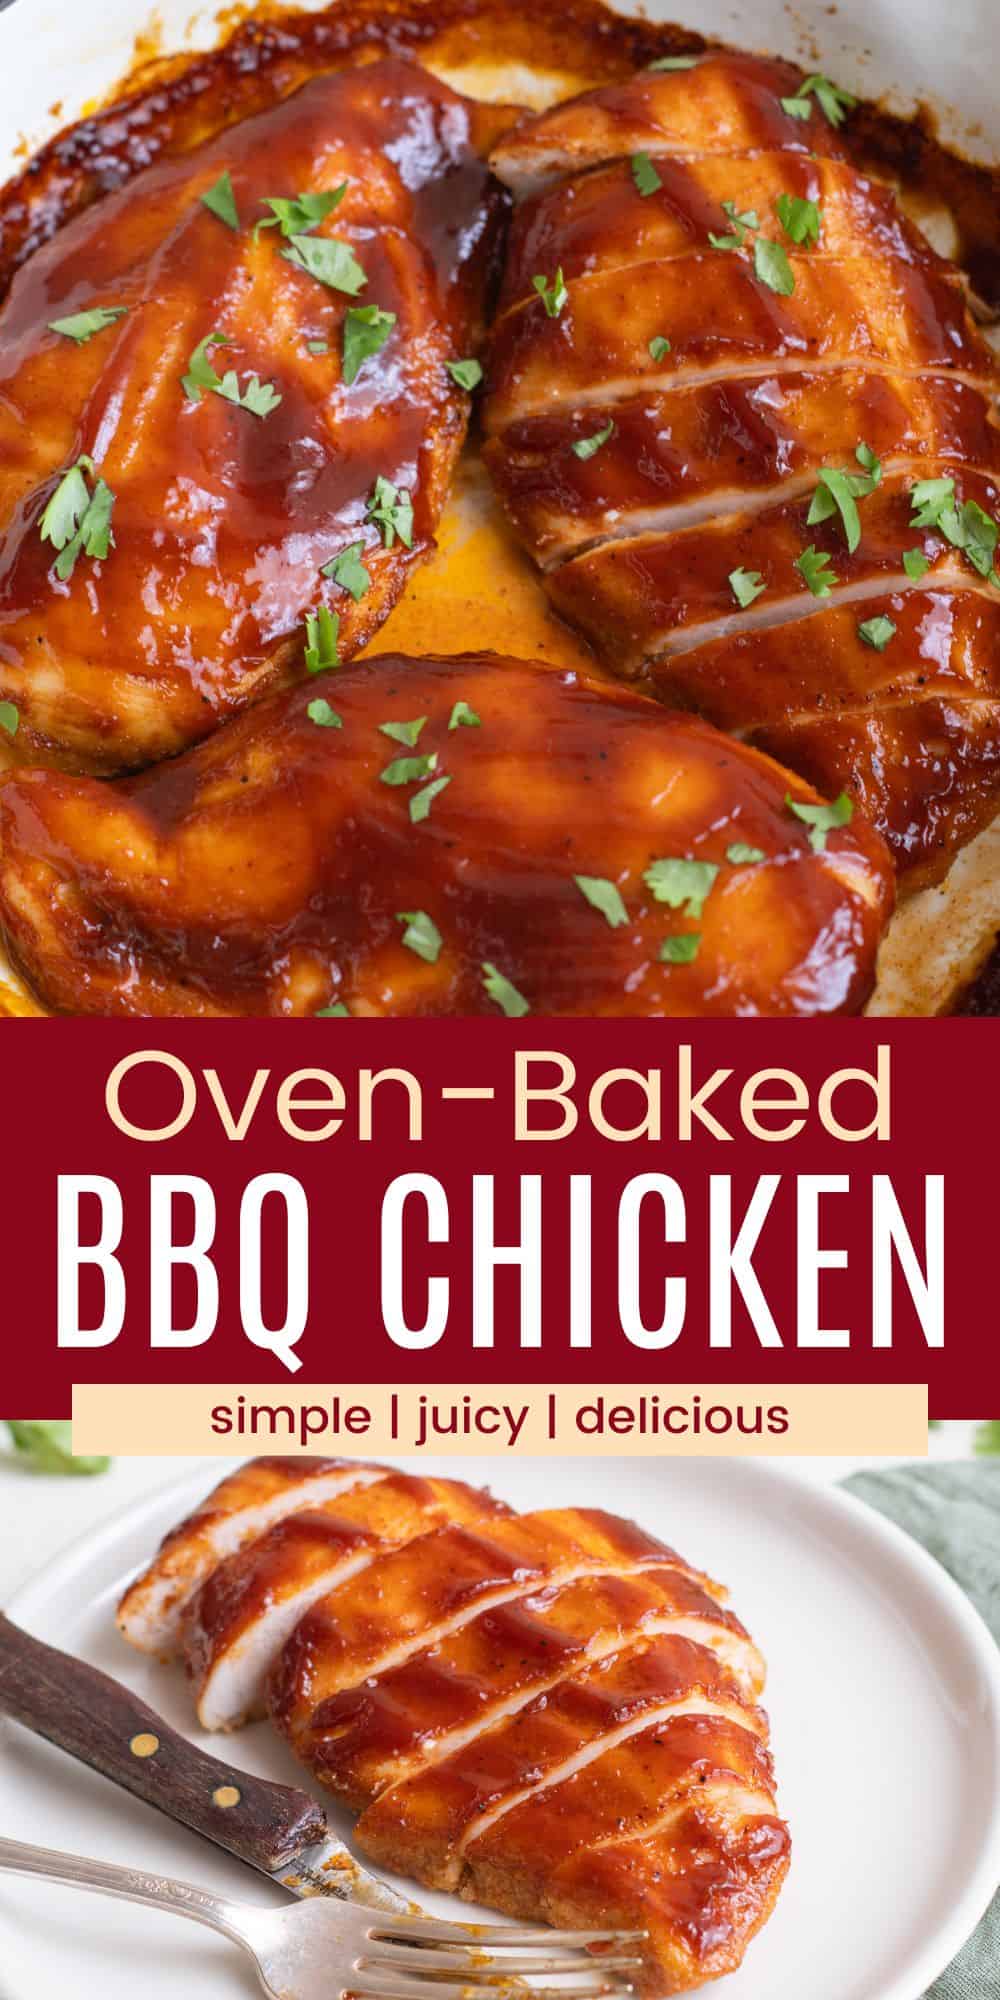 Oven-Baked BBQ Chicken Breasts | Cupcakes & Kale Chips